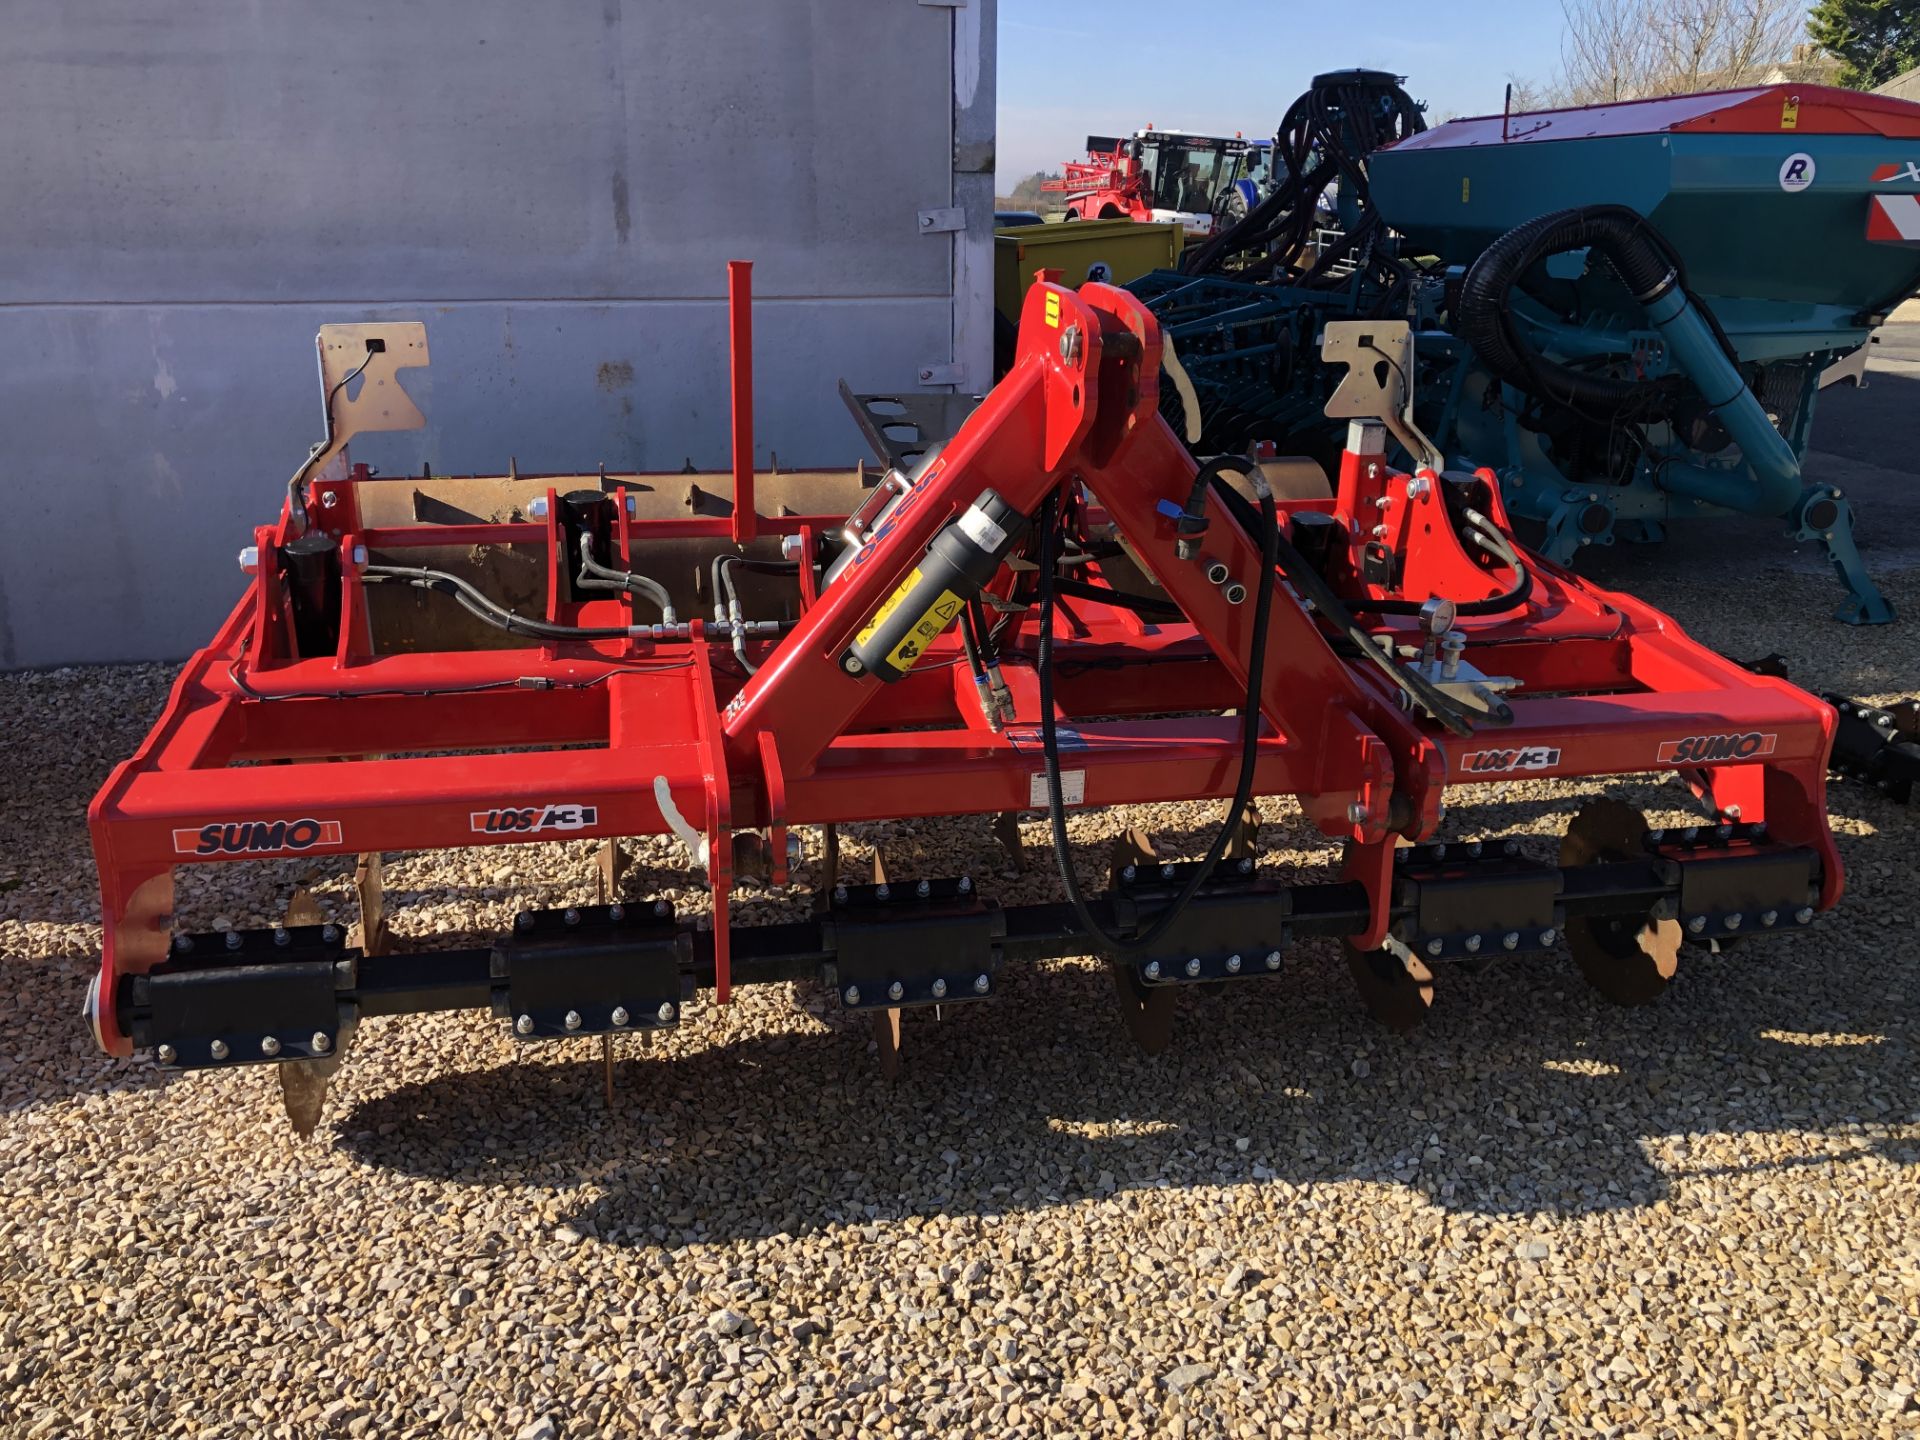 2021 Sumo LDS/3 FAR 3 metre low disturbance system combination Cultivator c/w packer roller. - Image 4 of 5